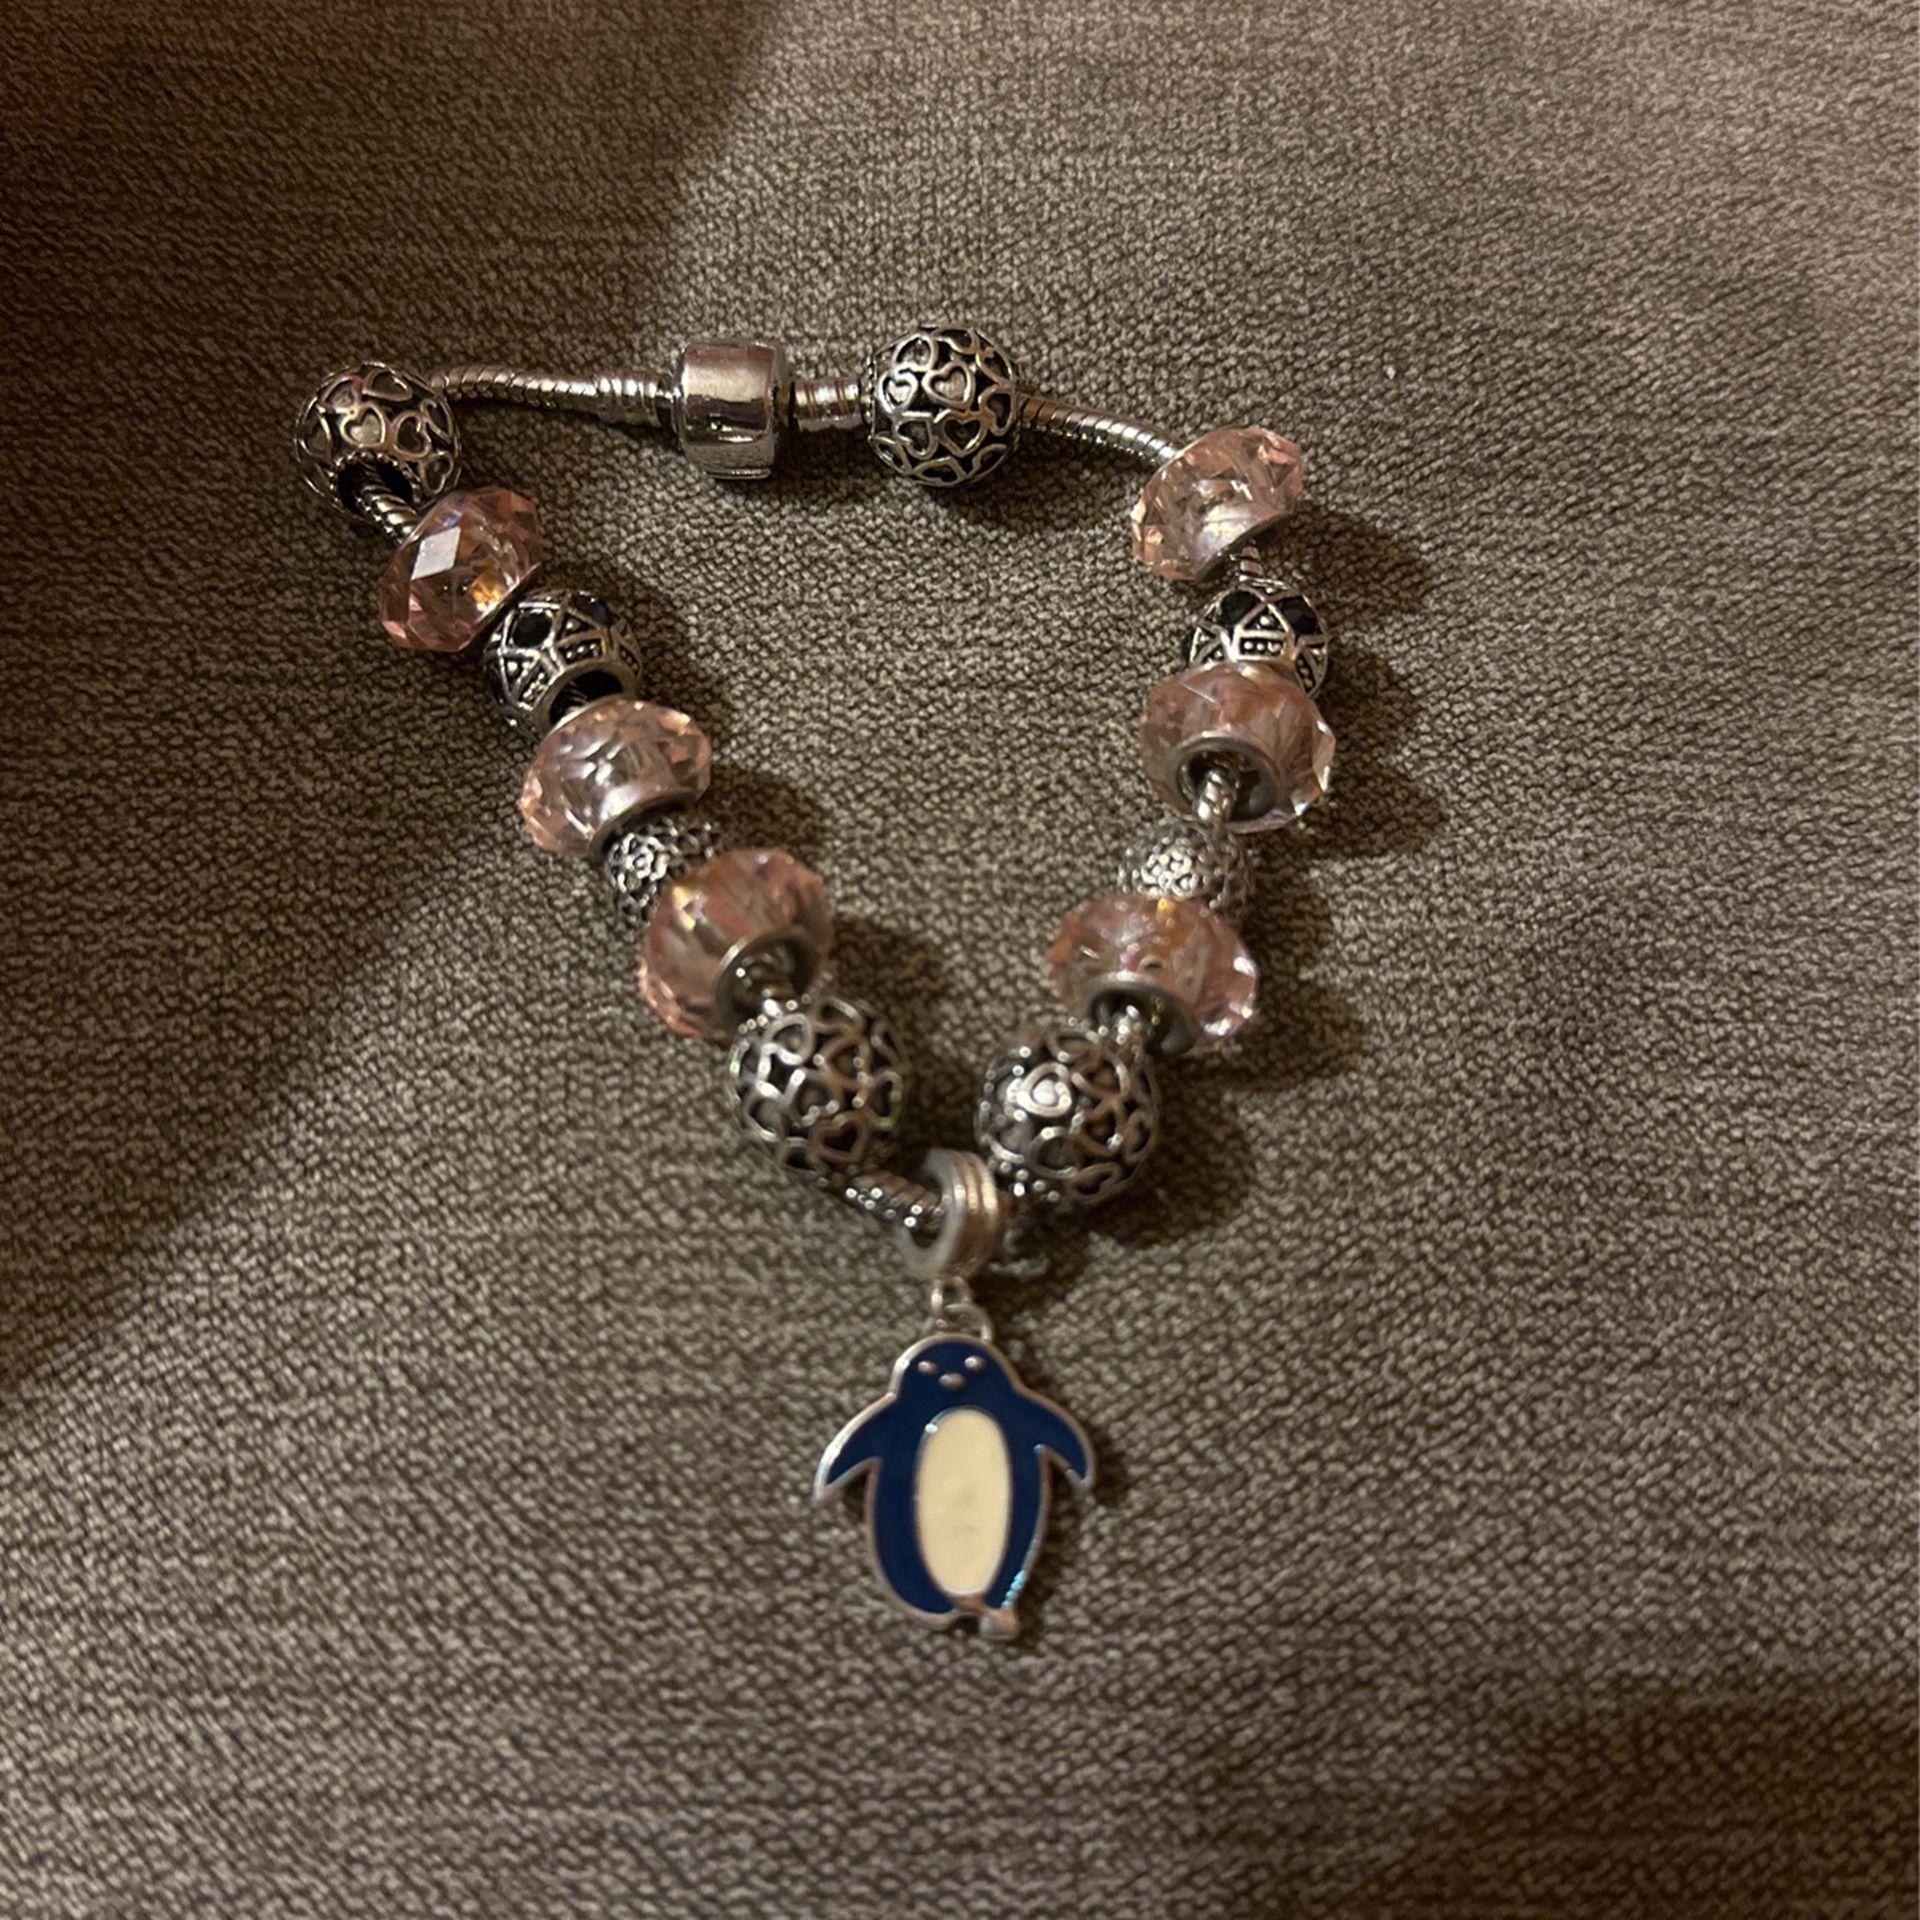 Bracelet, Silver With Pink and Silver Charms With A Penguin Charm